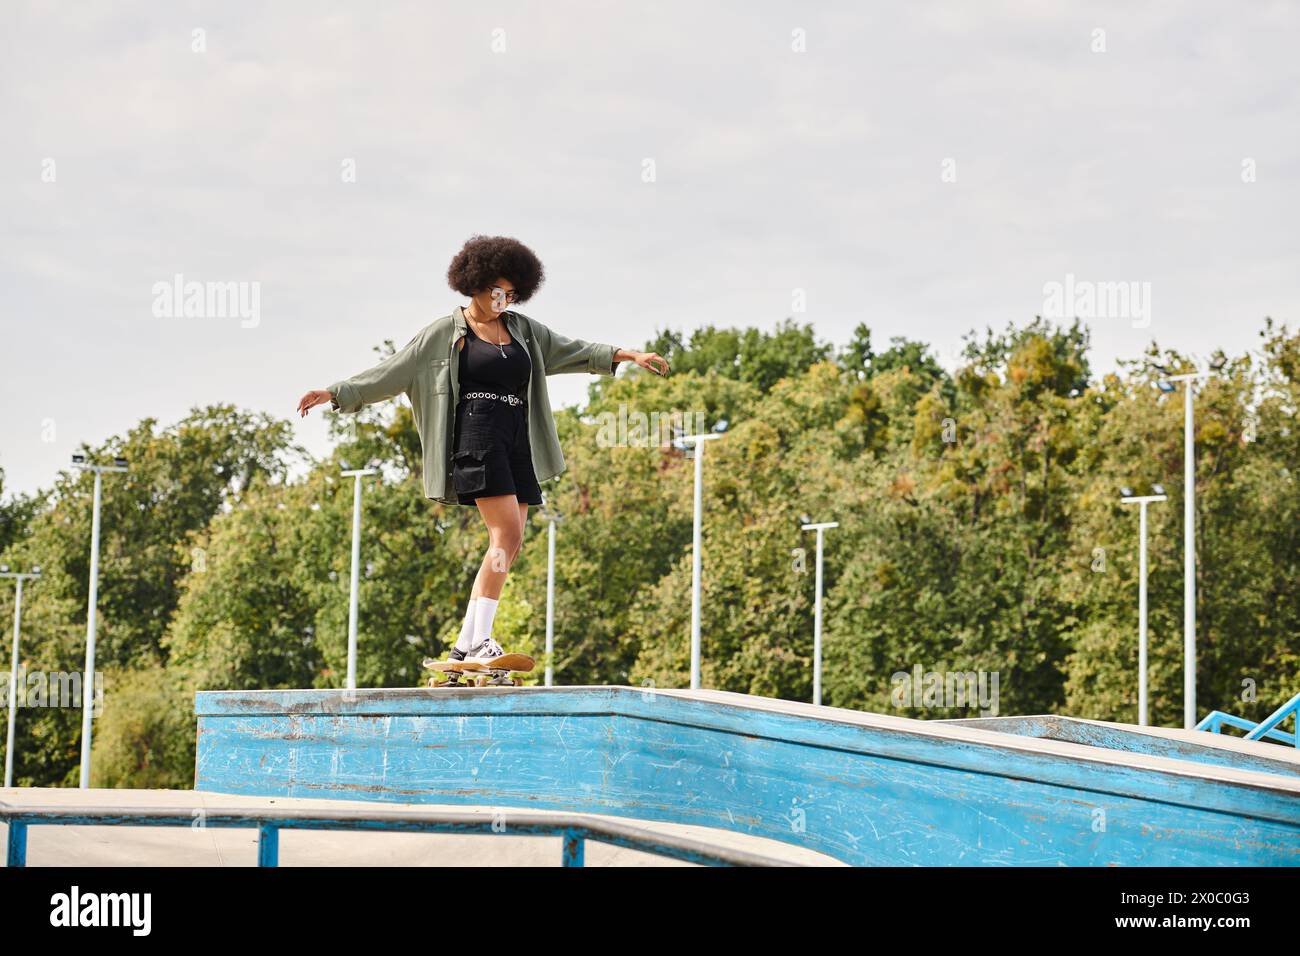 A young African American woman with curly hair skillfully skateboarding on the edge of a pool in an outdoor skate park. Stock Photo